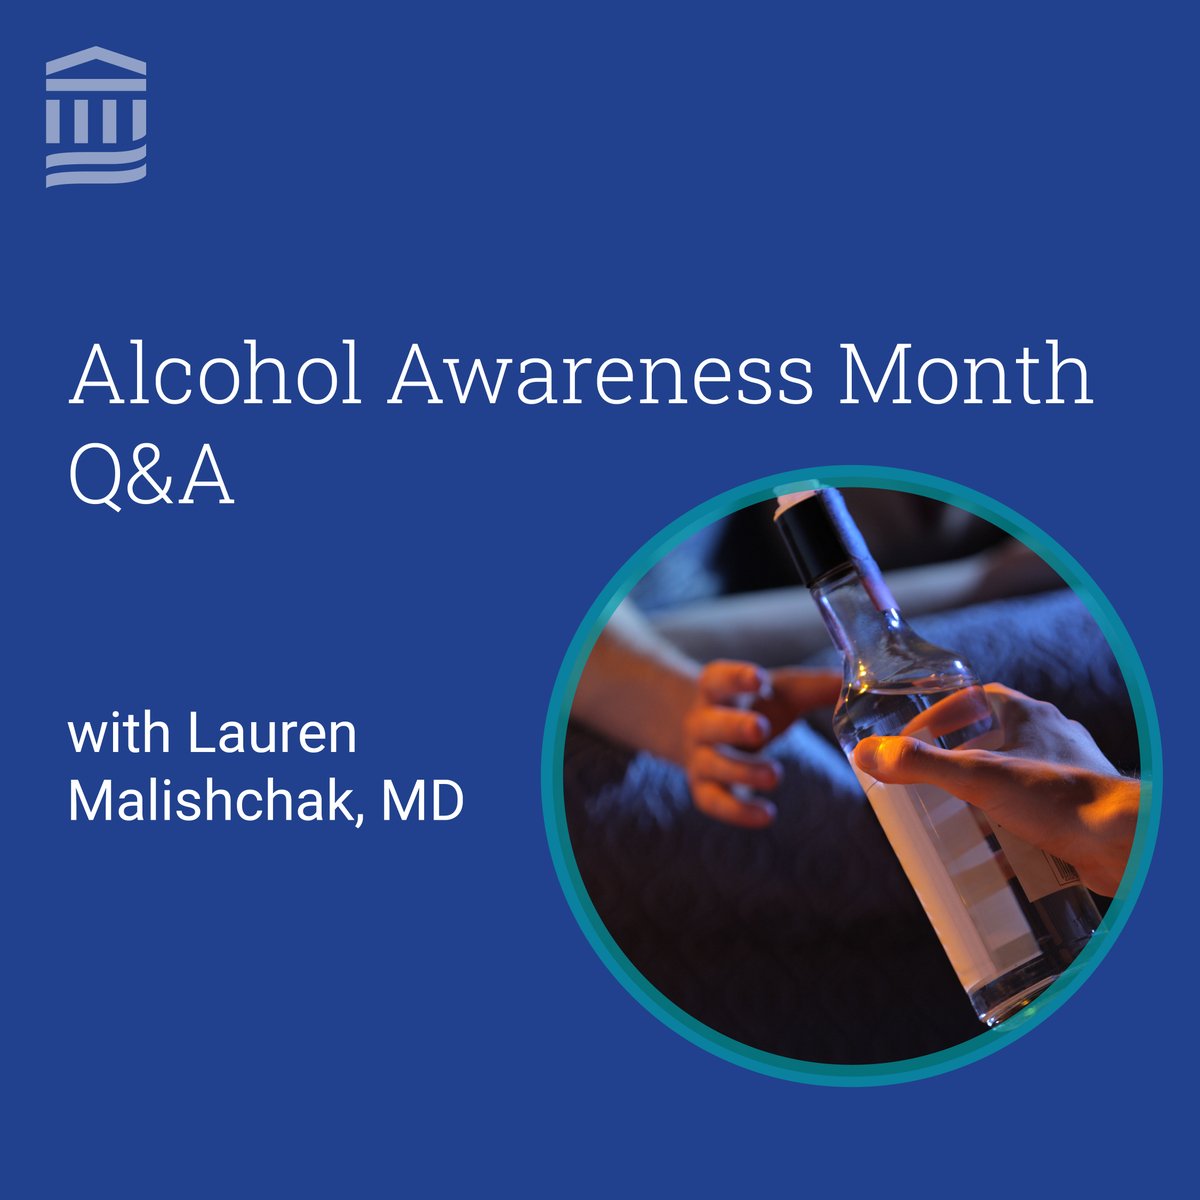 For #AlcoholAwarenessMonth, we asked Dr. Lauren Malishchak to answer some common questions regarding alcohol use: spklr.io/6015omZ3